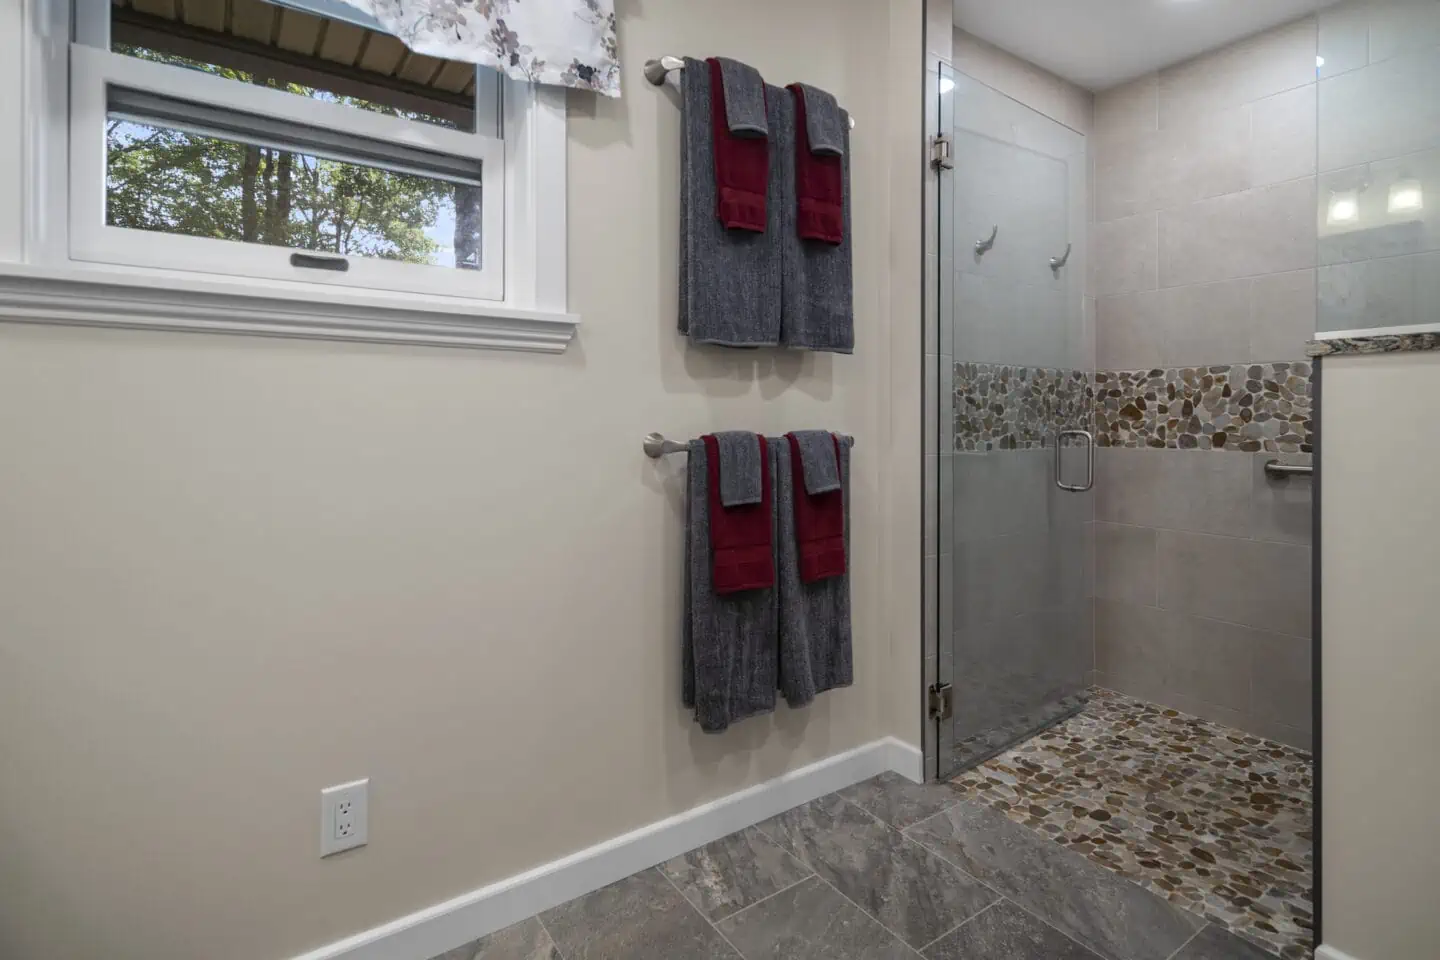 Bathroom with tile floor and accessible shower